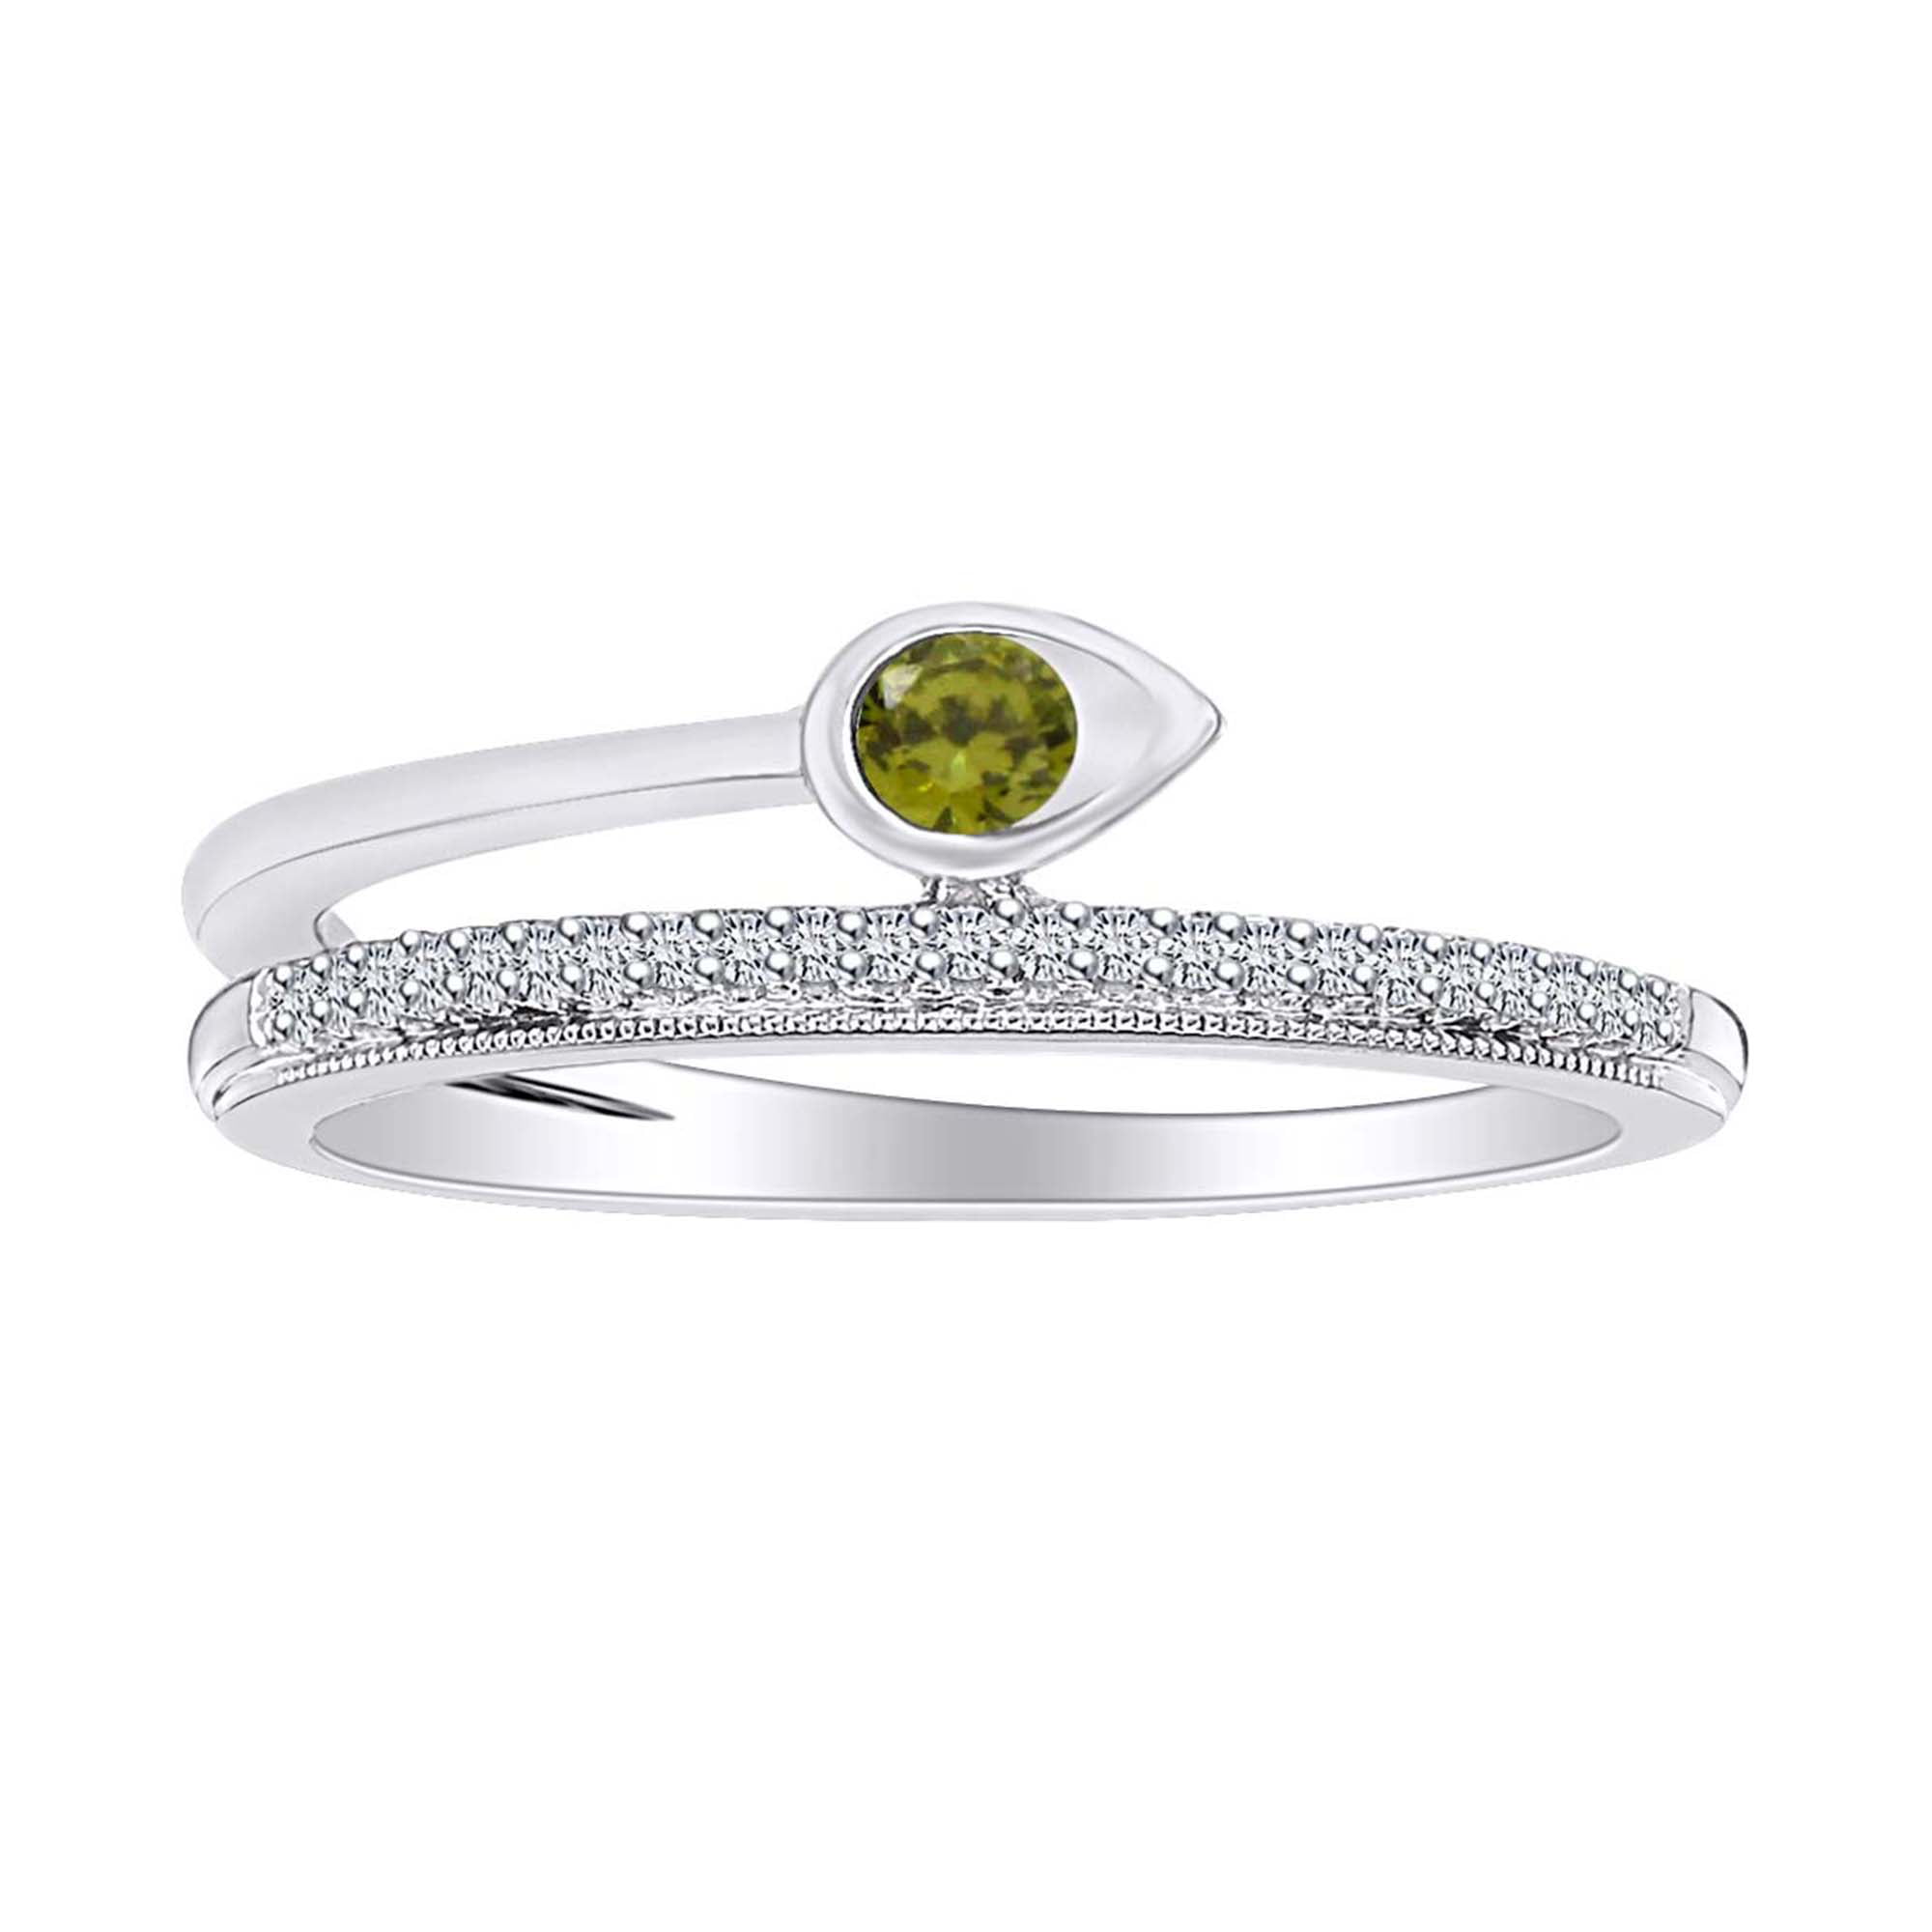 Wishrocks Simulated Birthstone with CZ Mens Wedding Band Ring in 14K Yellow Gold Over Sterling Silver 